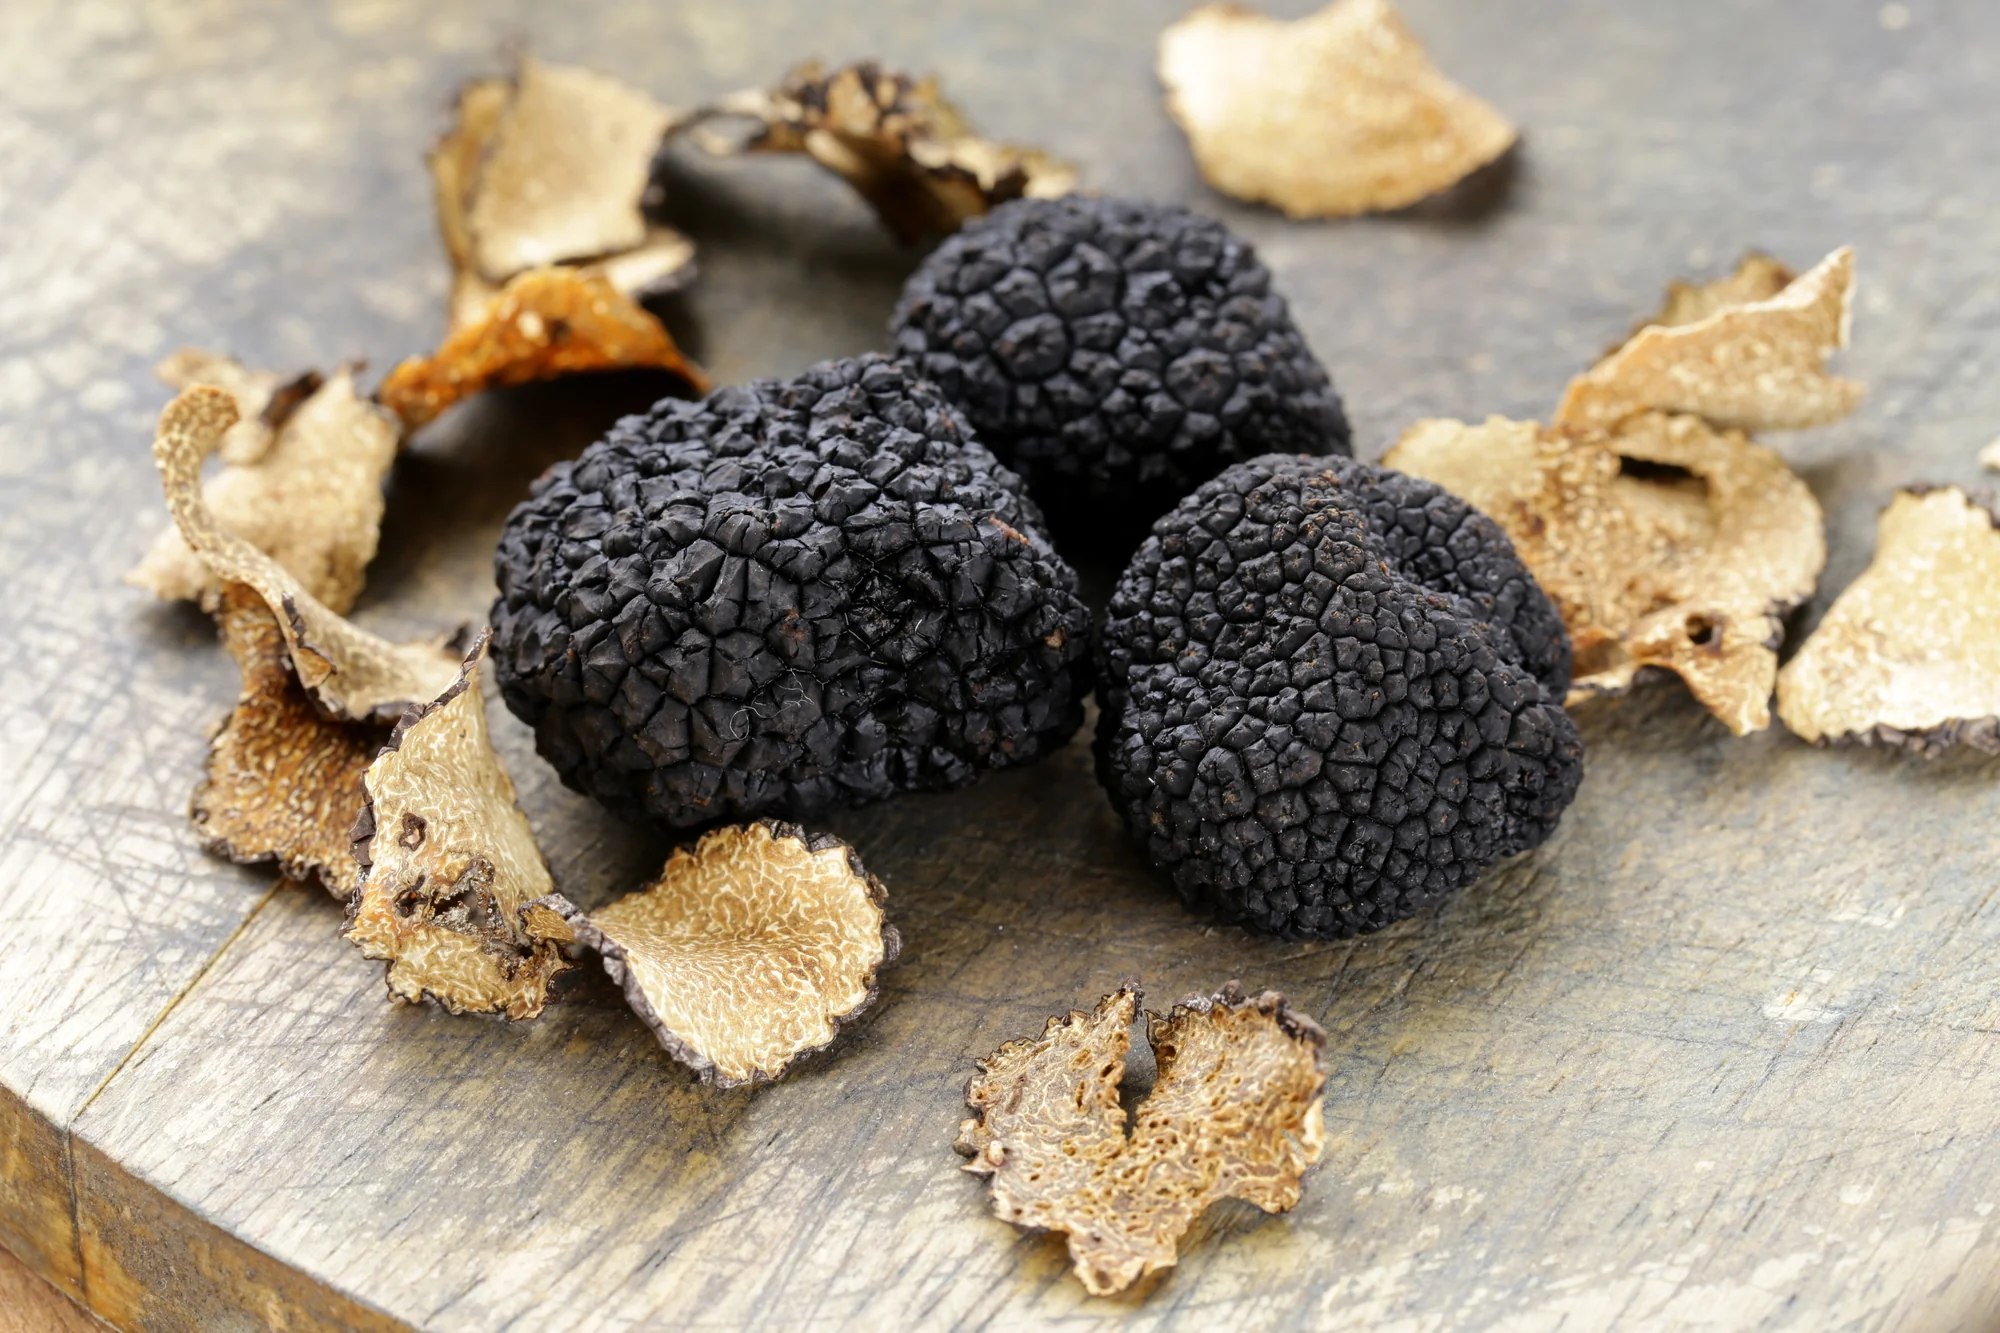 Luxurious Pairings: Truffles are often paired with simple dishes such as pasta, risotto, eggs, and potatoes to highlight their exquisite flavor. They are also used to flavor oils, butters, and sauces. ]]>